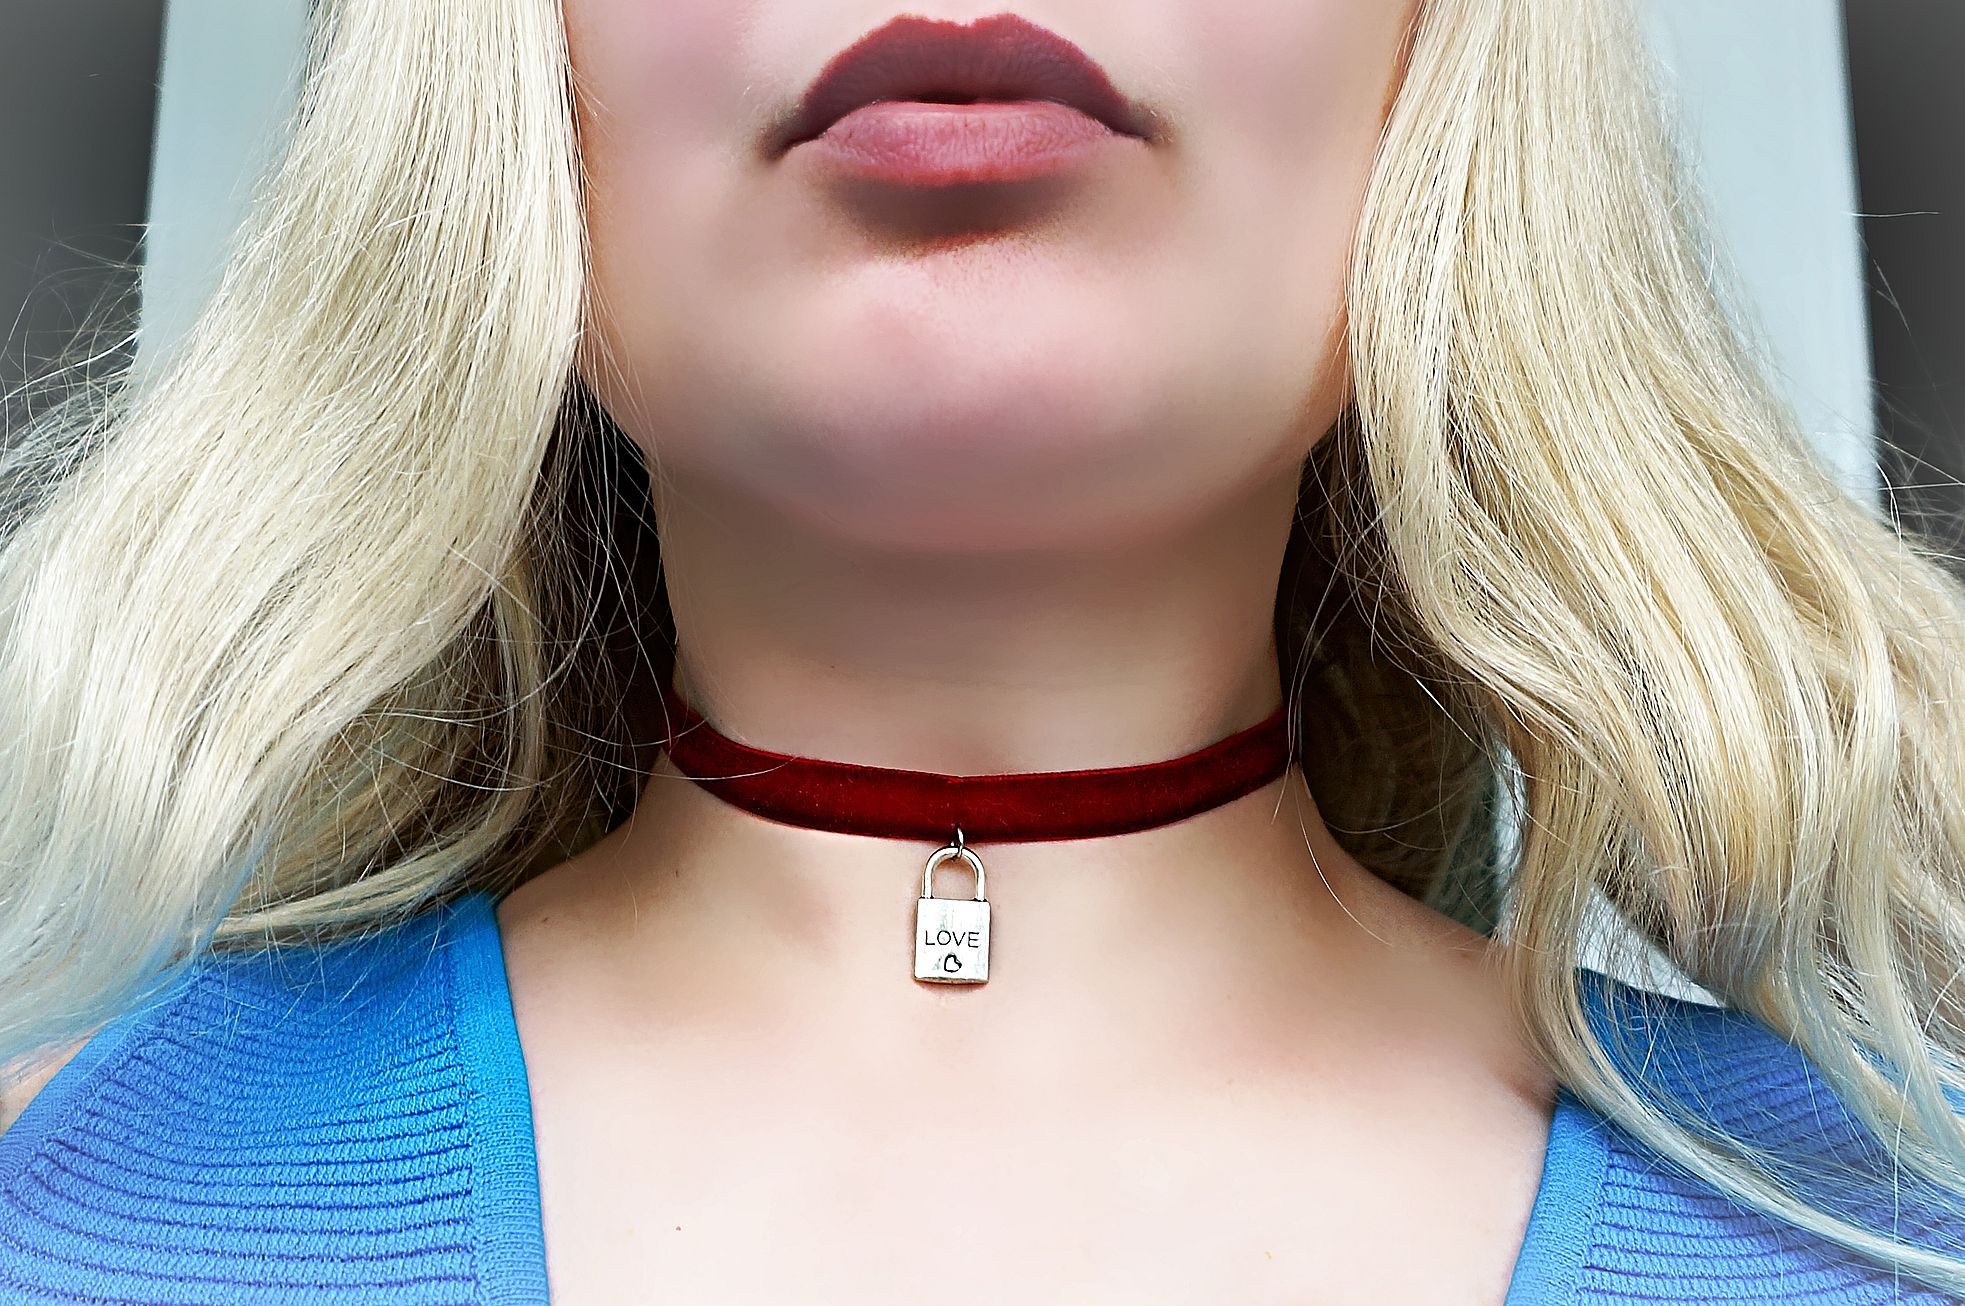 Baby Girl Heart Choker Submissive Necklace Bdsm Ddlg Collar Day Collar Discreet Bdsm Gift Baby Girl Collar Heart Collar